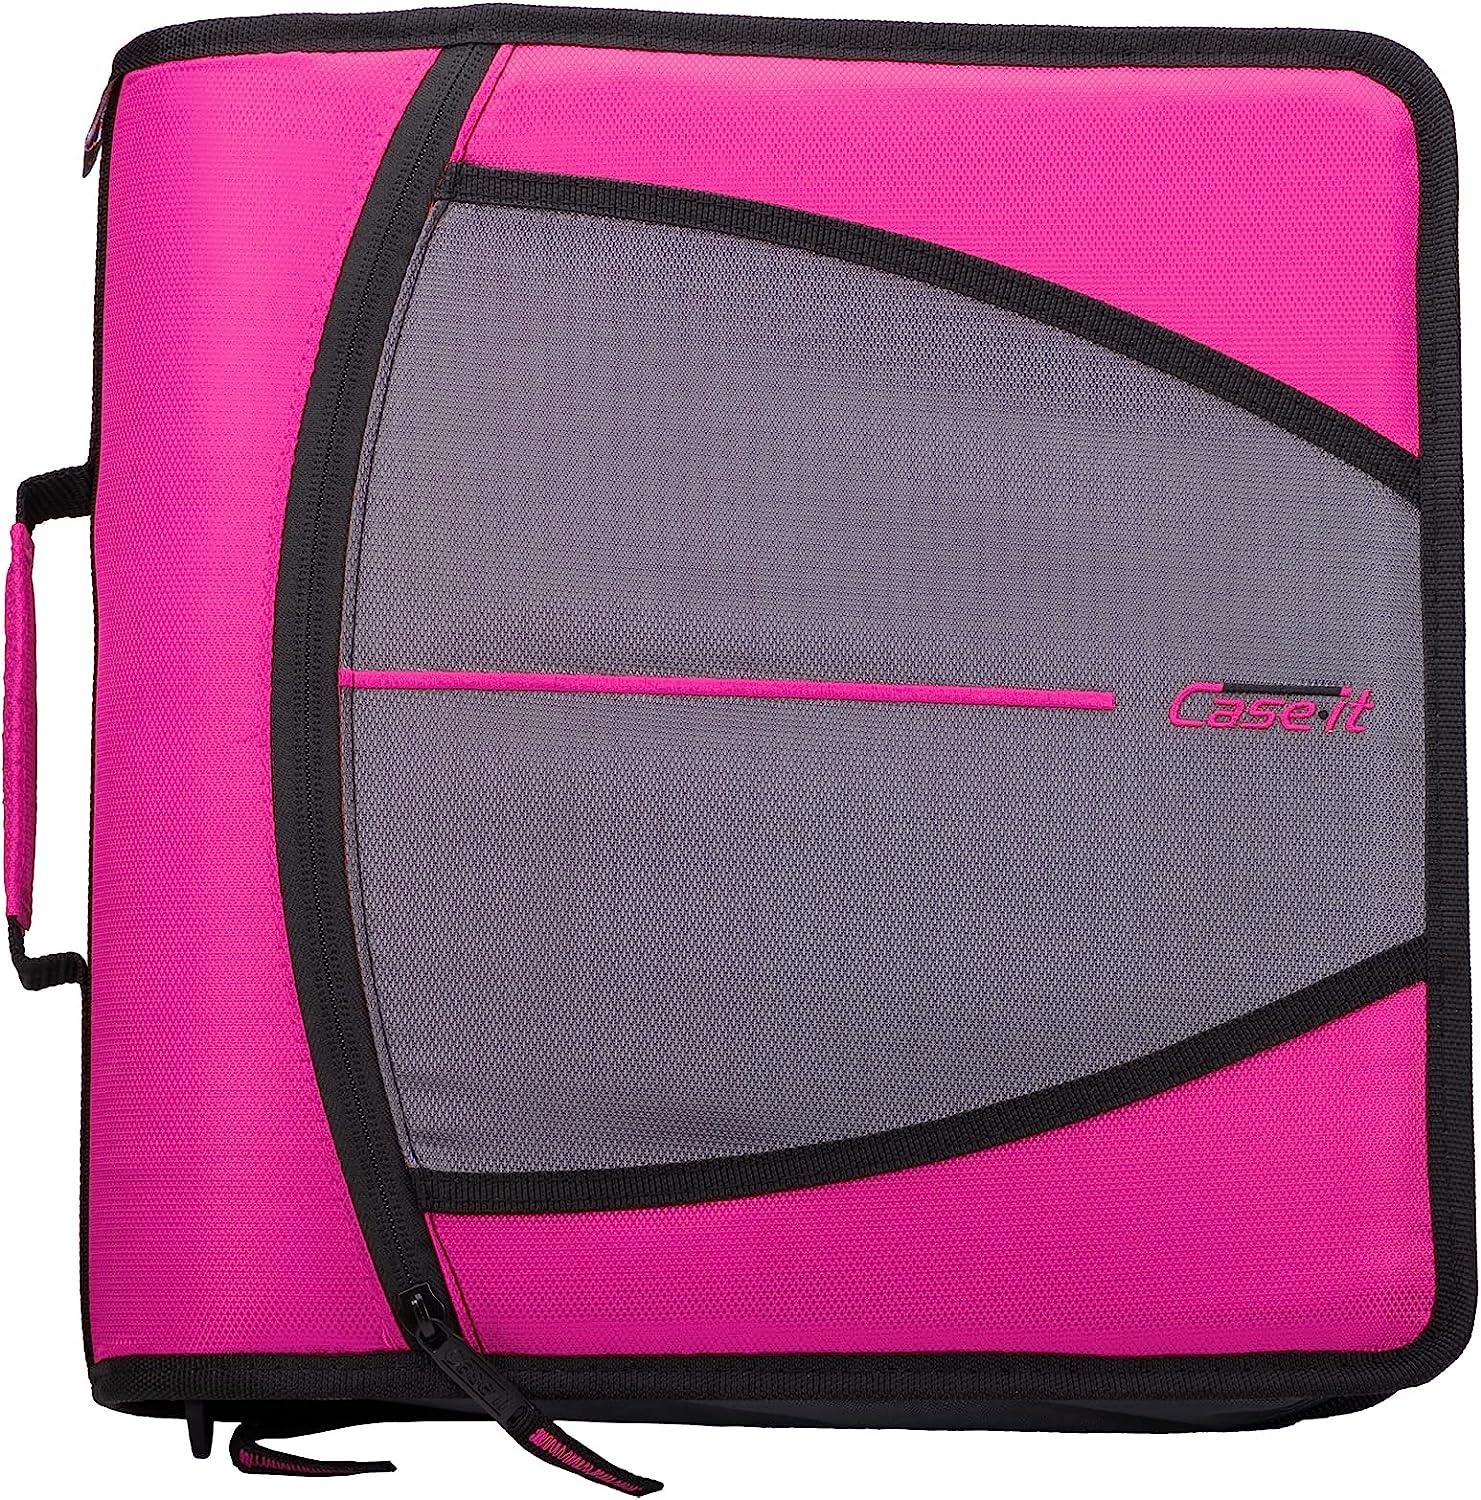 case-it the mighty zip tab zipper binder - 3 inch o-rings - 5 color tab expanding file folder - multiple